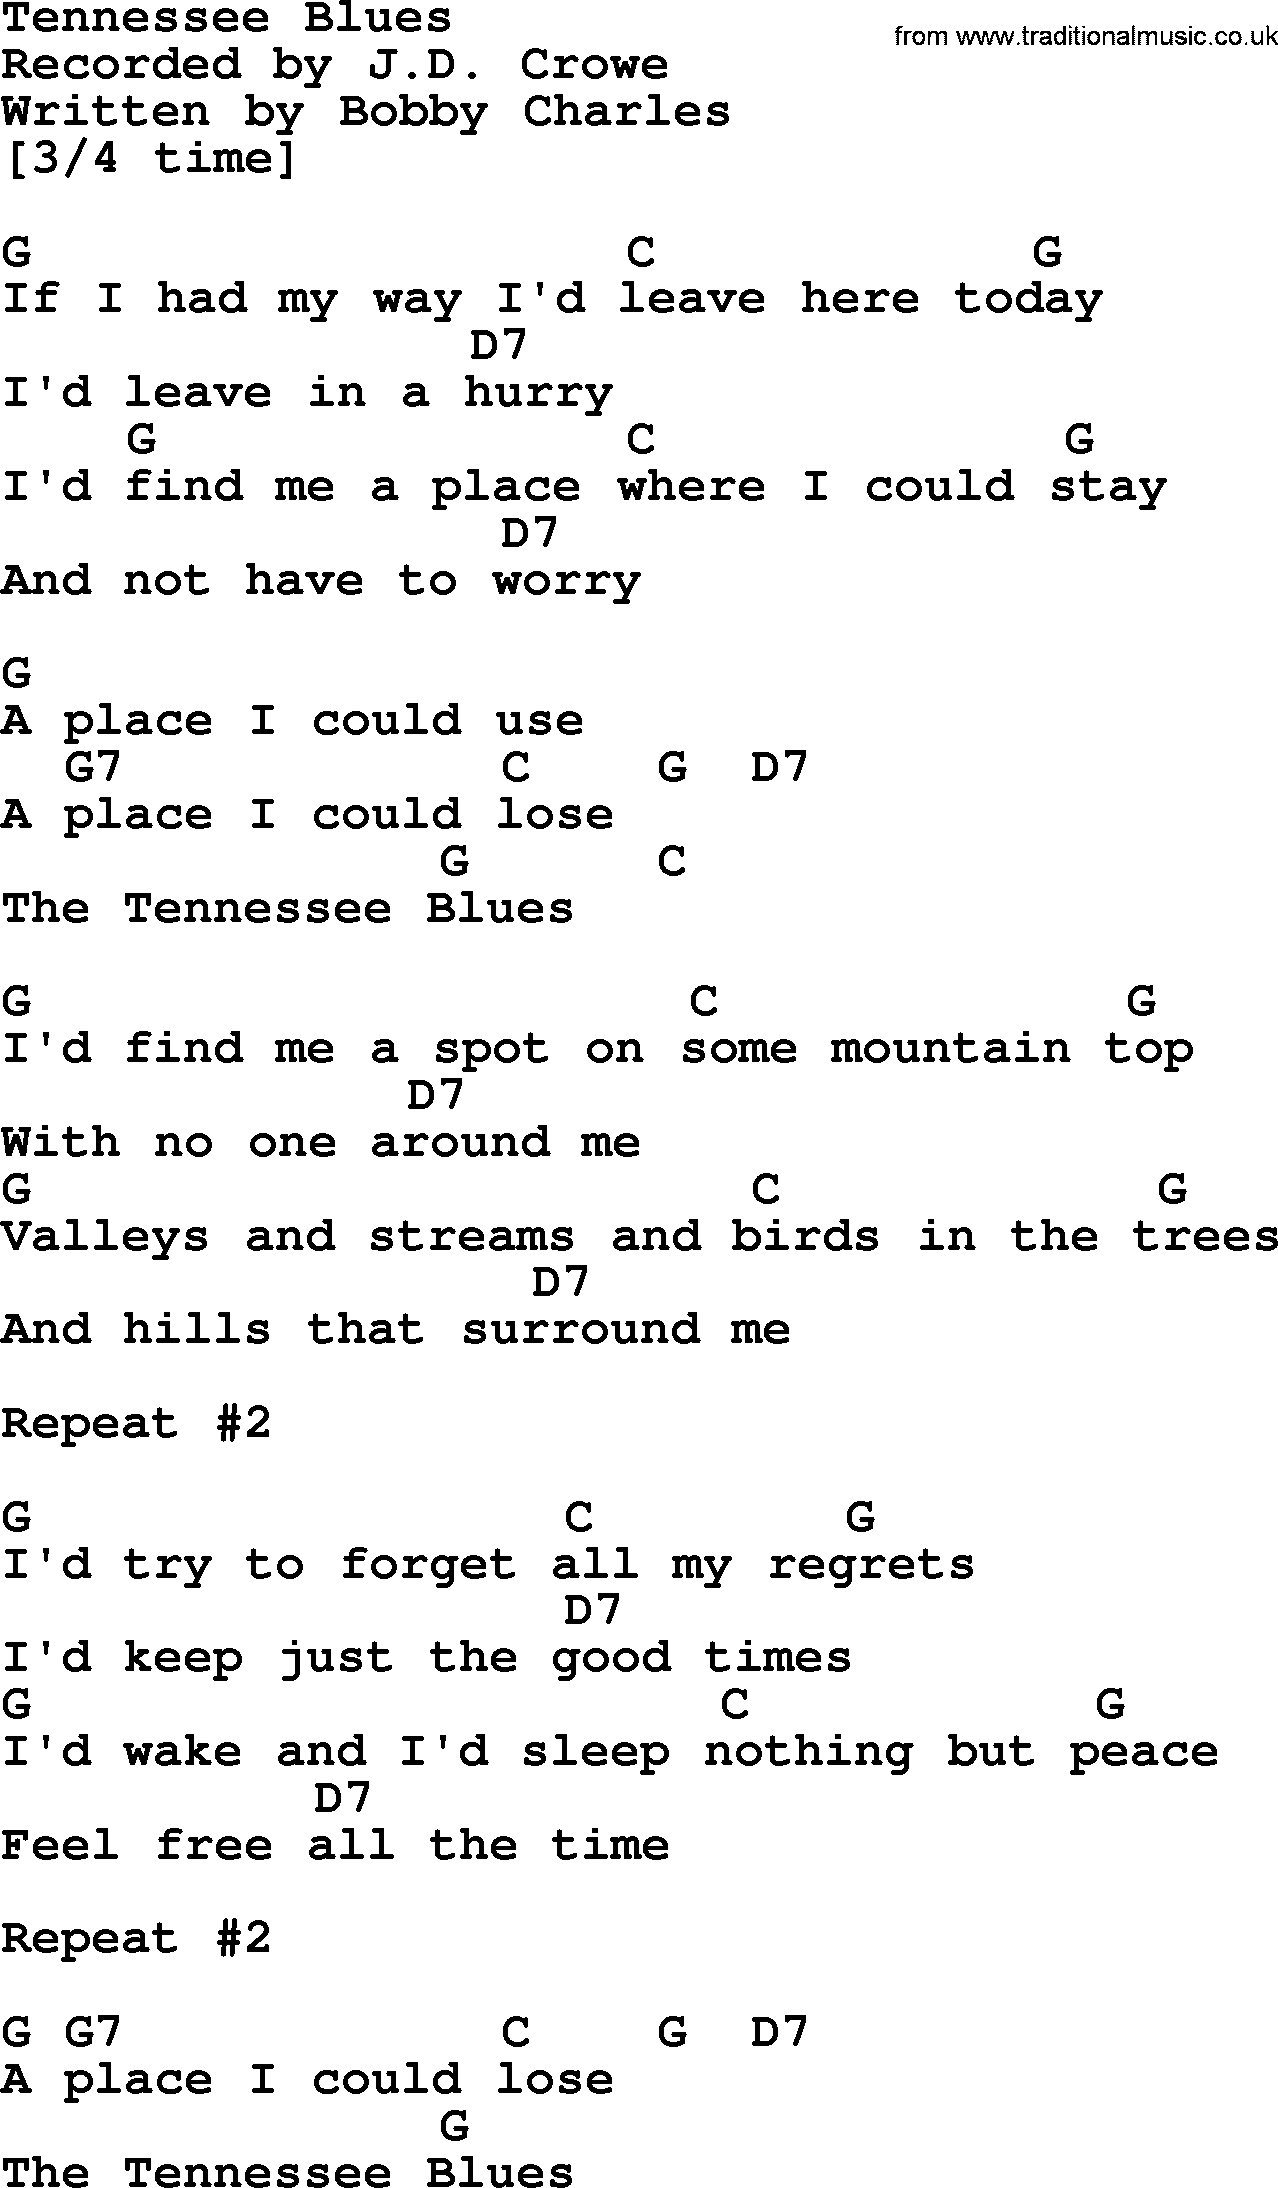 Bluegrass song: Tennessee Blues, lyrics and chords